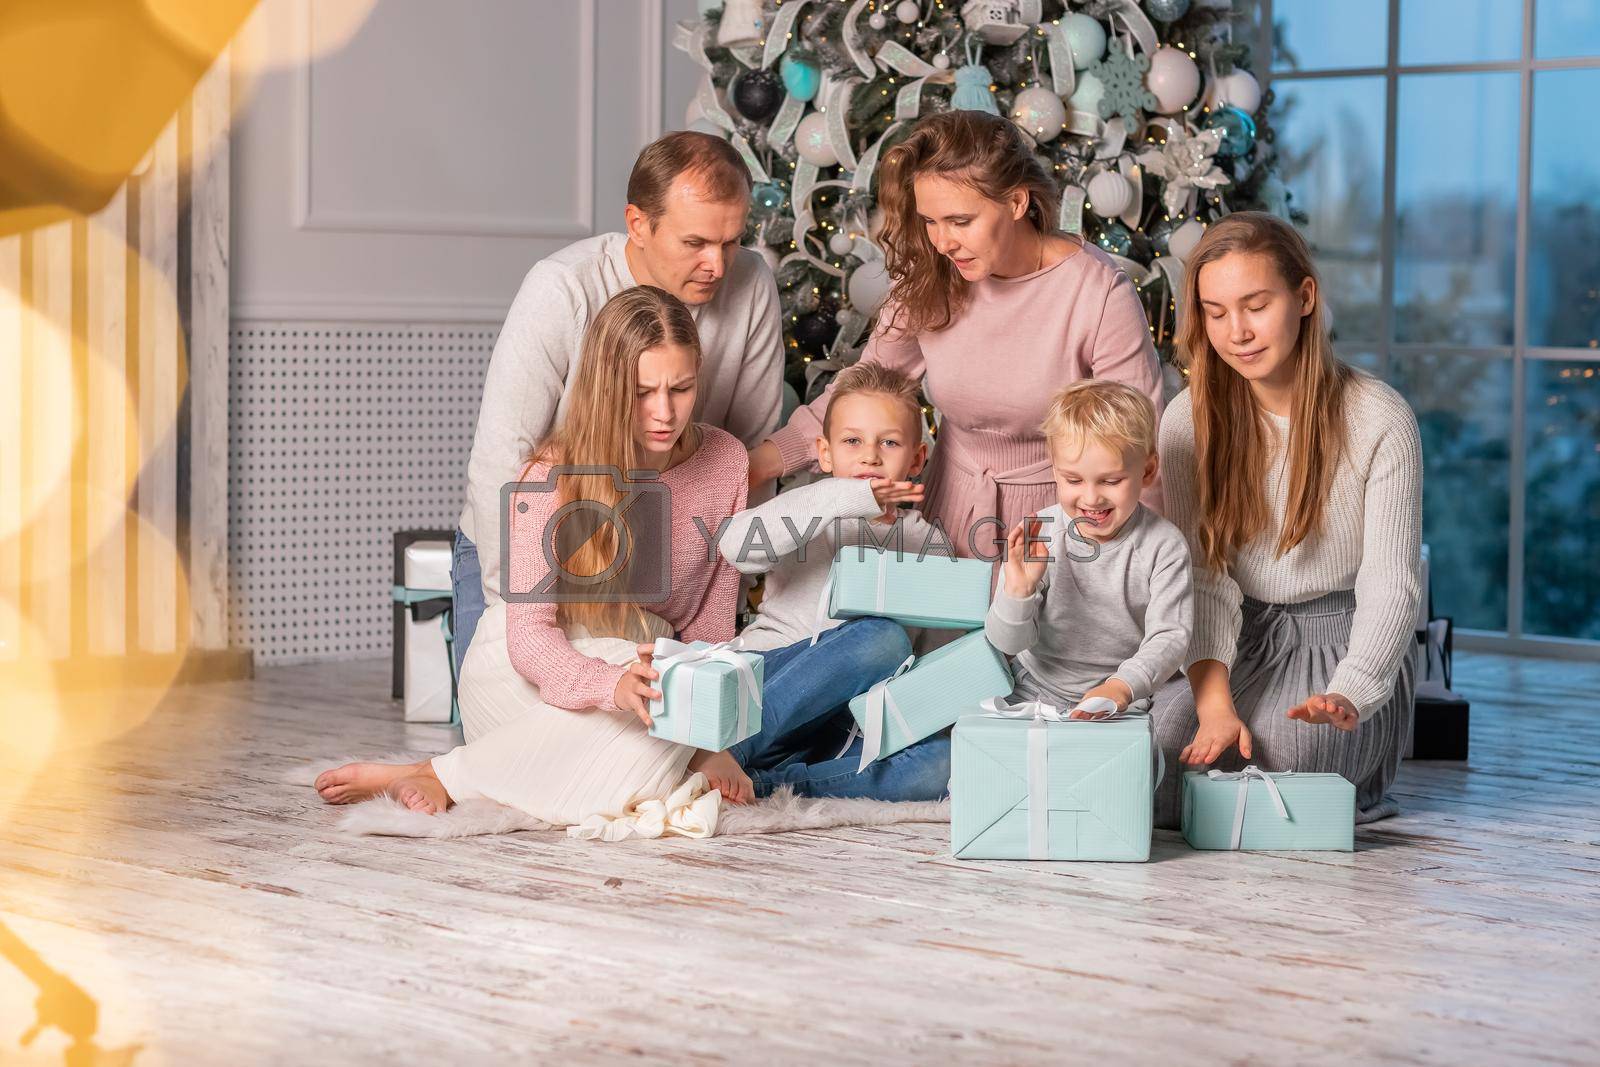 Royalty free image of Big happy family with many kids opening presents under the Christmas tree on Christmas eve by Len44ik